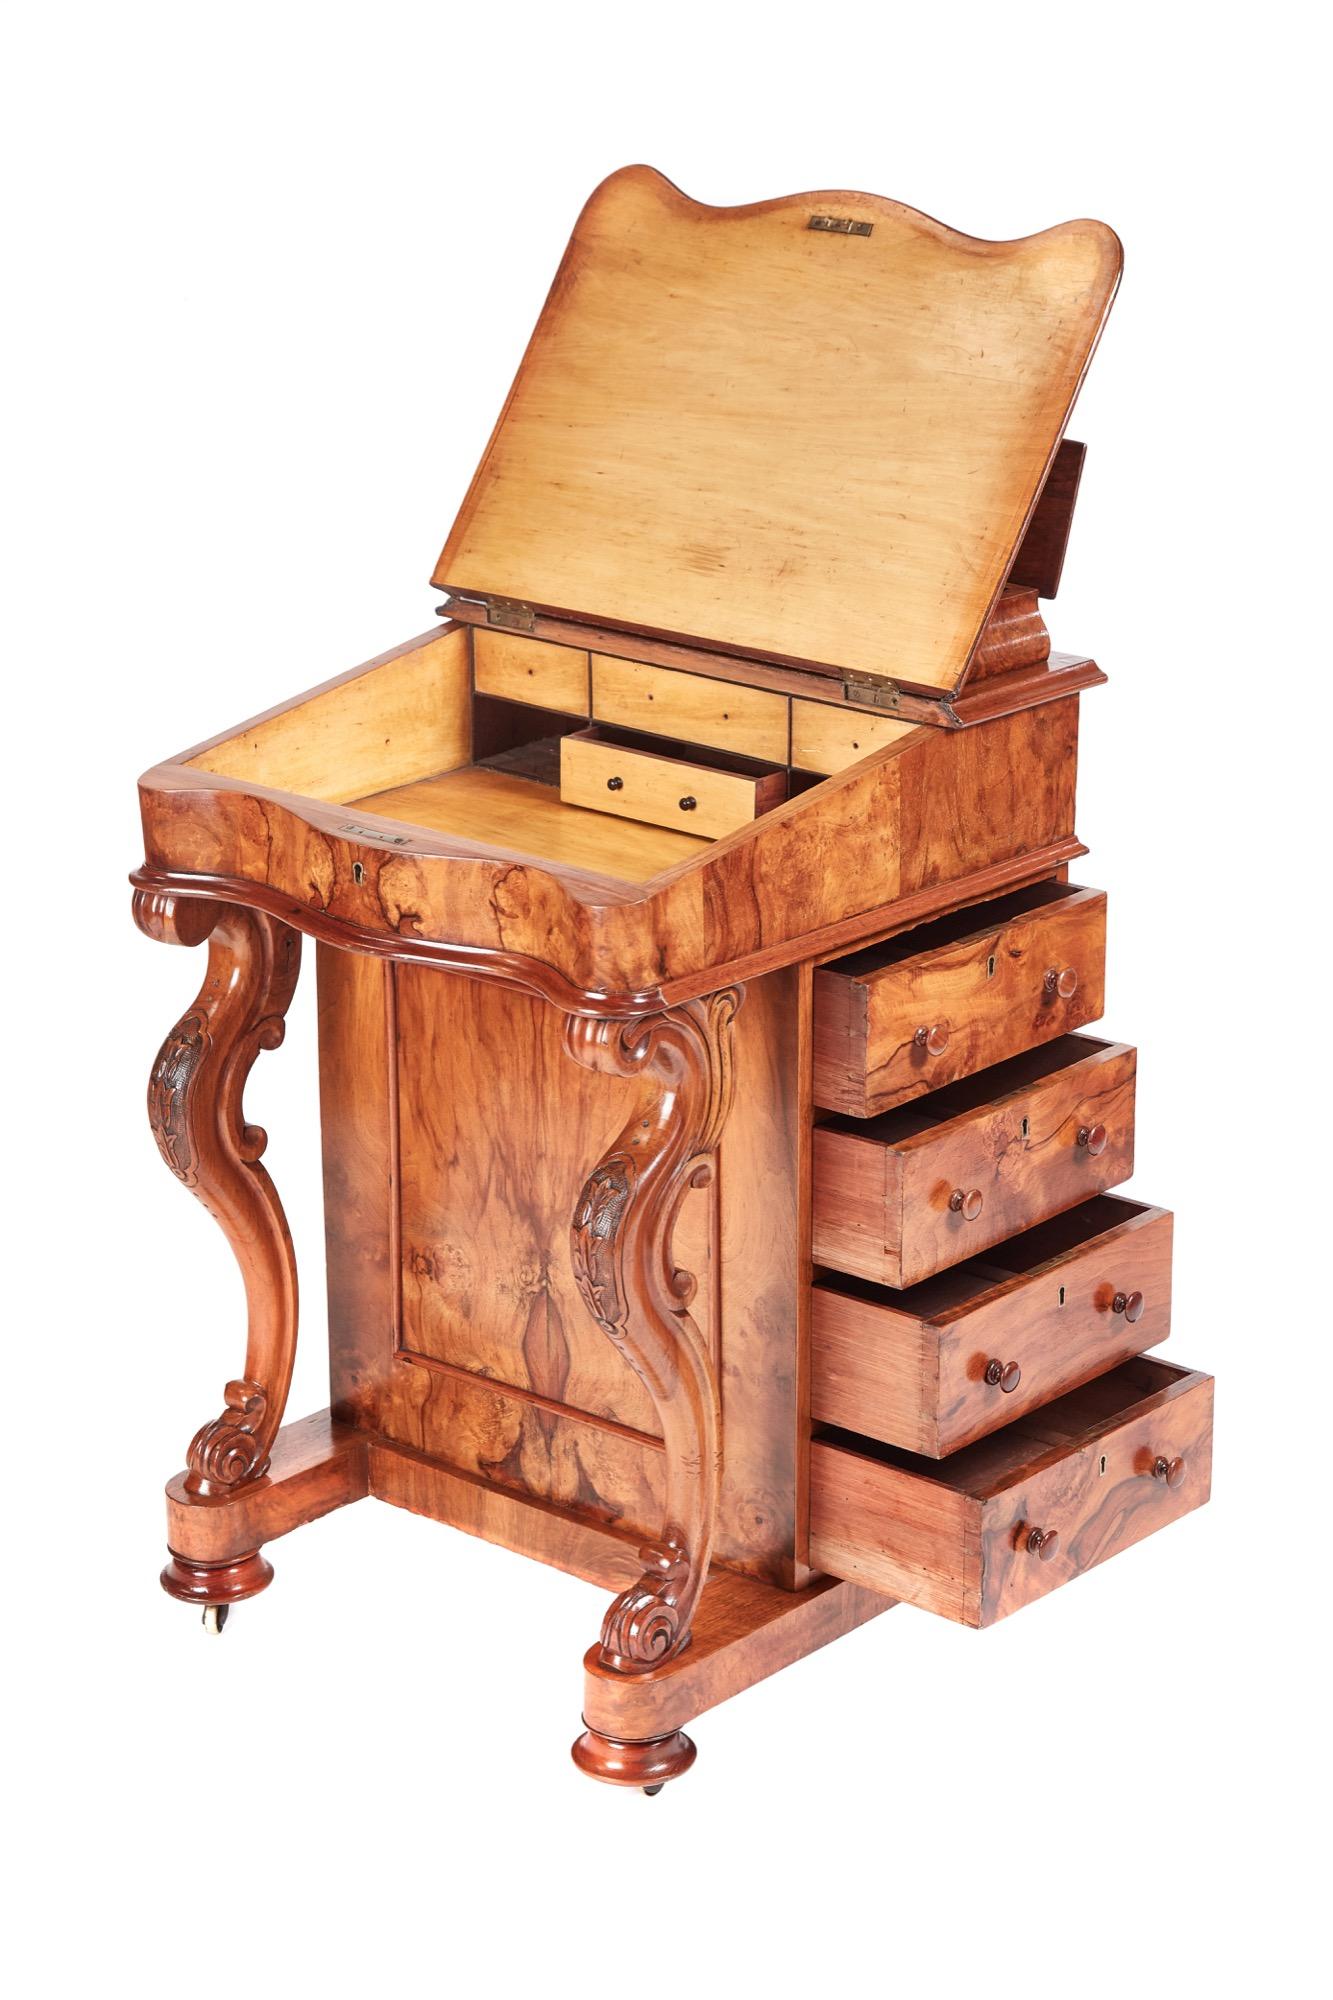 This is a 19th century Victorian antique burr walnut freestanding davenport which has a lift up lid, serpentine shaped writing slope and fitted interior. It boasts a beautiful burr walnut front panel, elegant carved cabriole legs, four opening